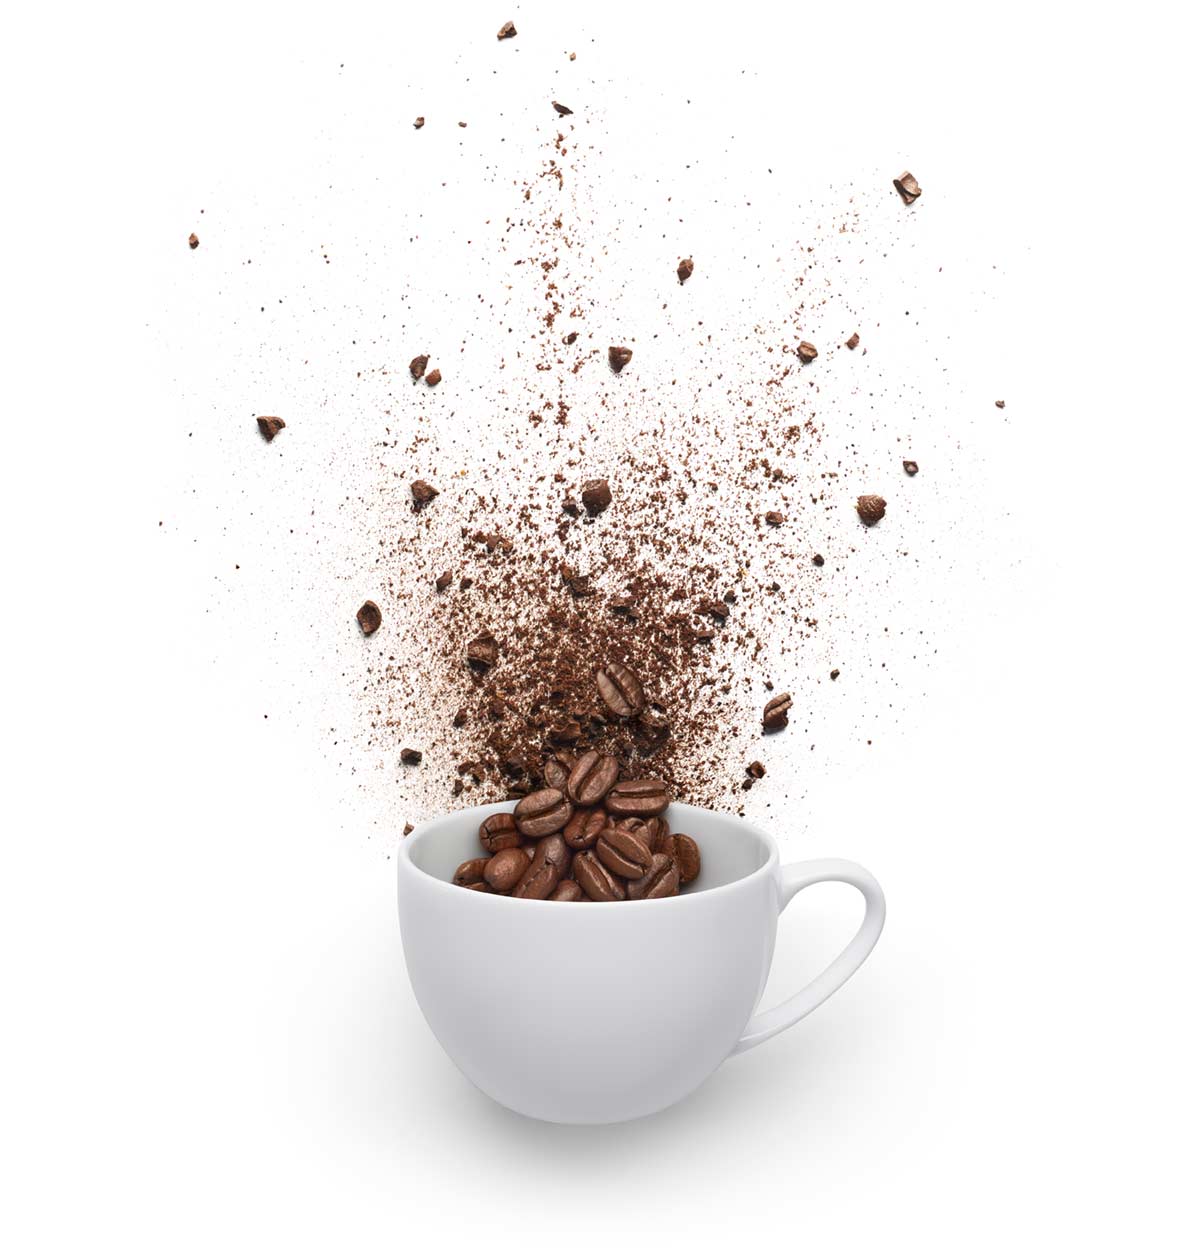 Coffee beans exploding out of a mug